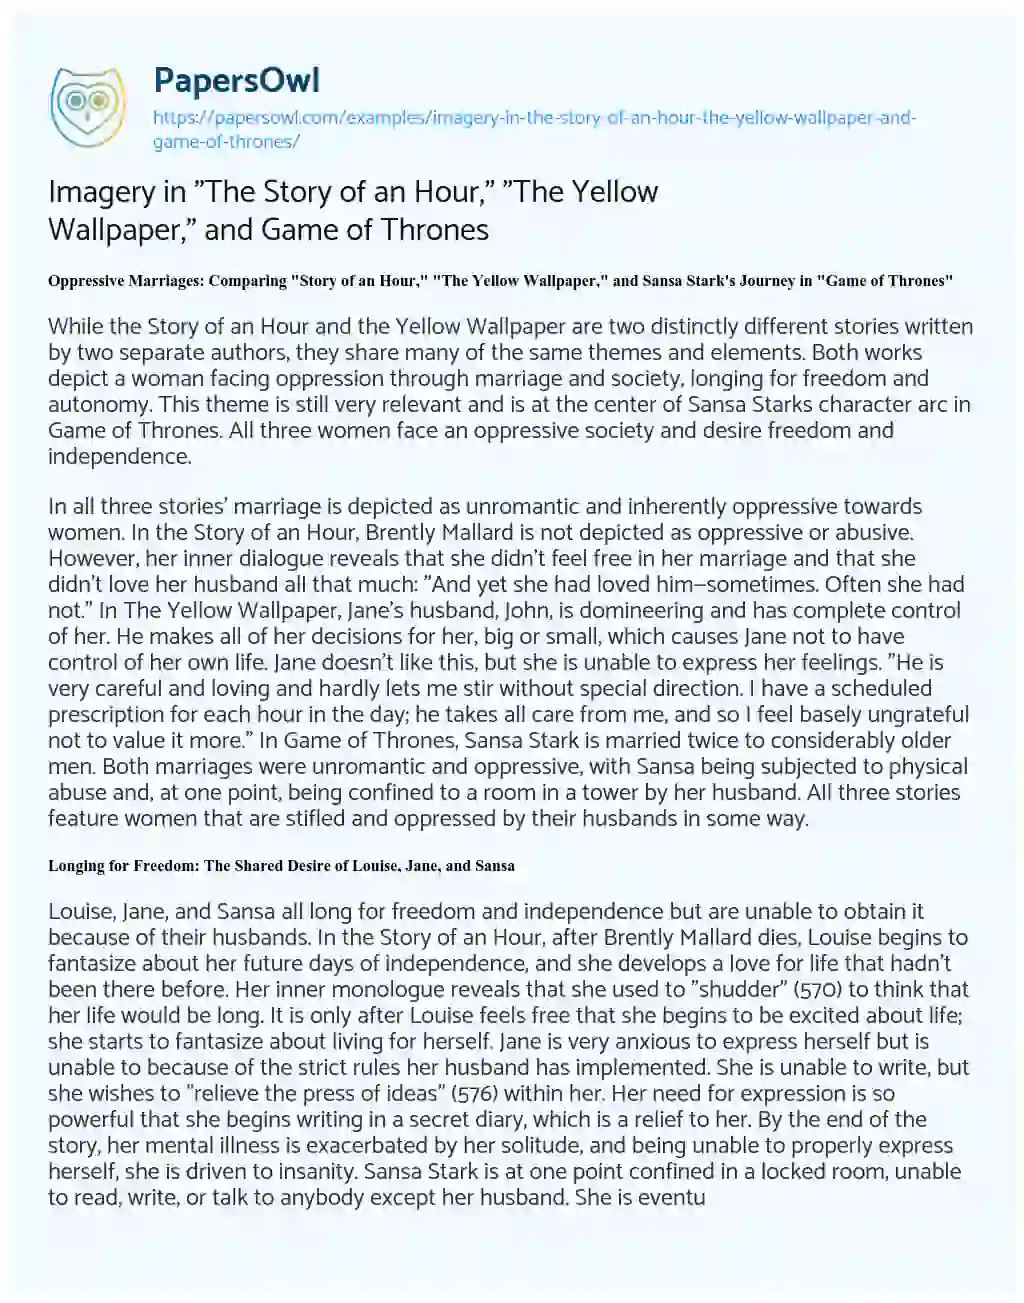 Essay on Imagery in “The Story of an Hour,” “The Yellow Wallpaper,” and Game of Thrones